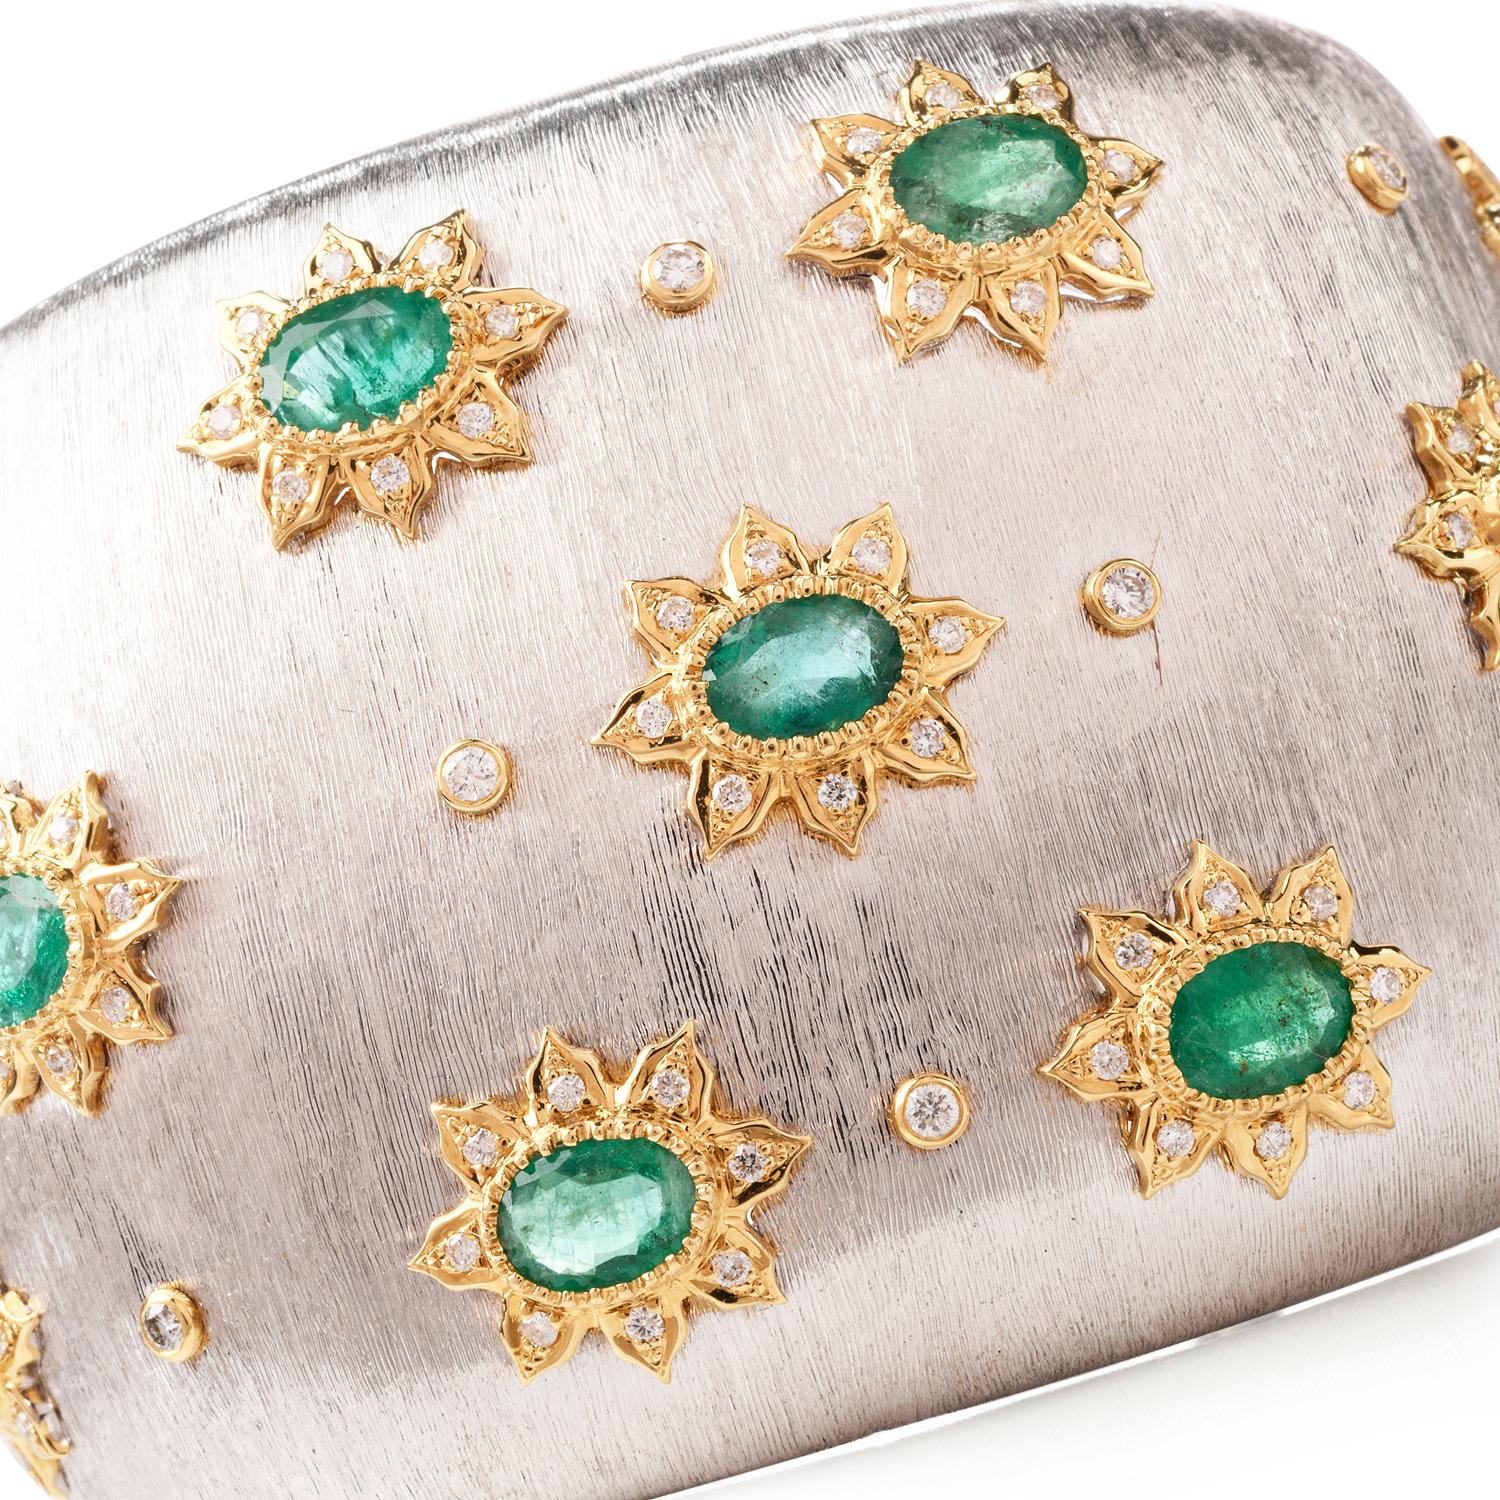 Wear the look of a Designer. This extraordinary Diamond and Emerald bracelet created in a Floral Motif and

crafted in 76.9 Grams of 18K yellow and white Gold. Measuring approx. 1-3/4 Inches wide, the brushed finish lays the stage

for the florets